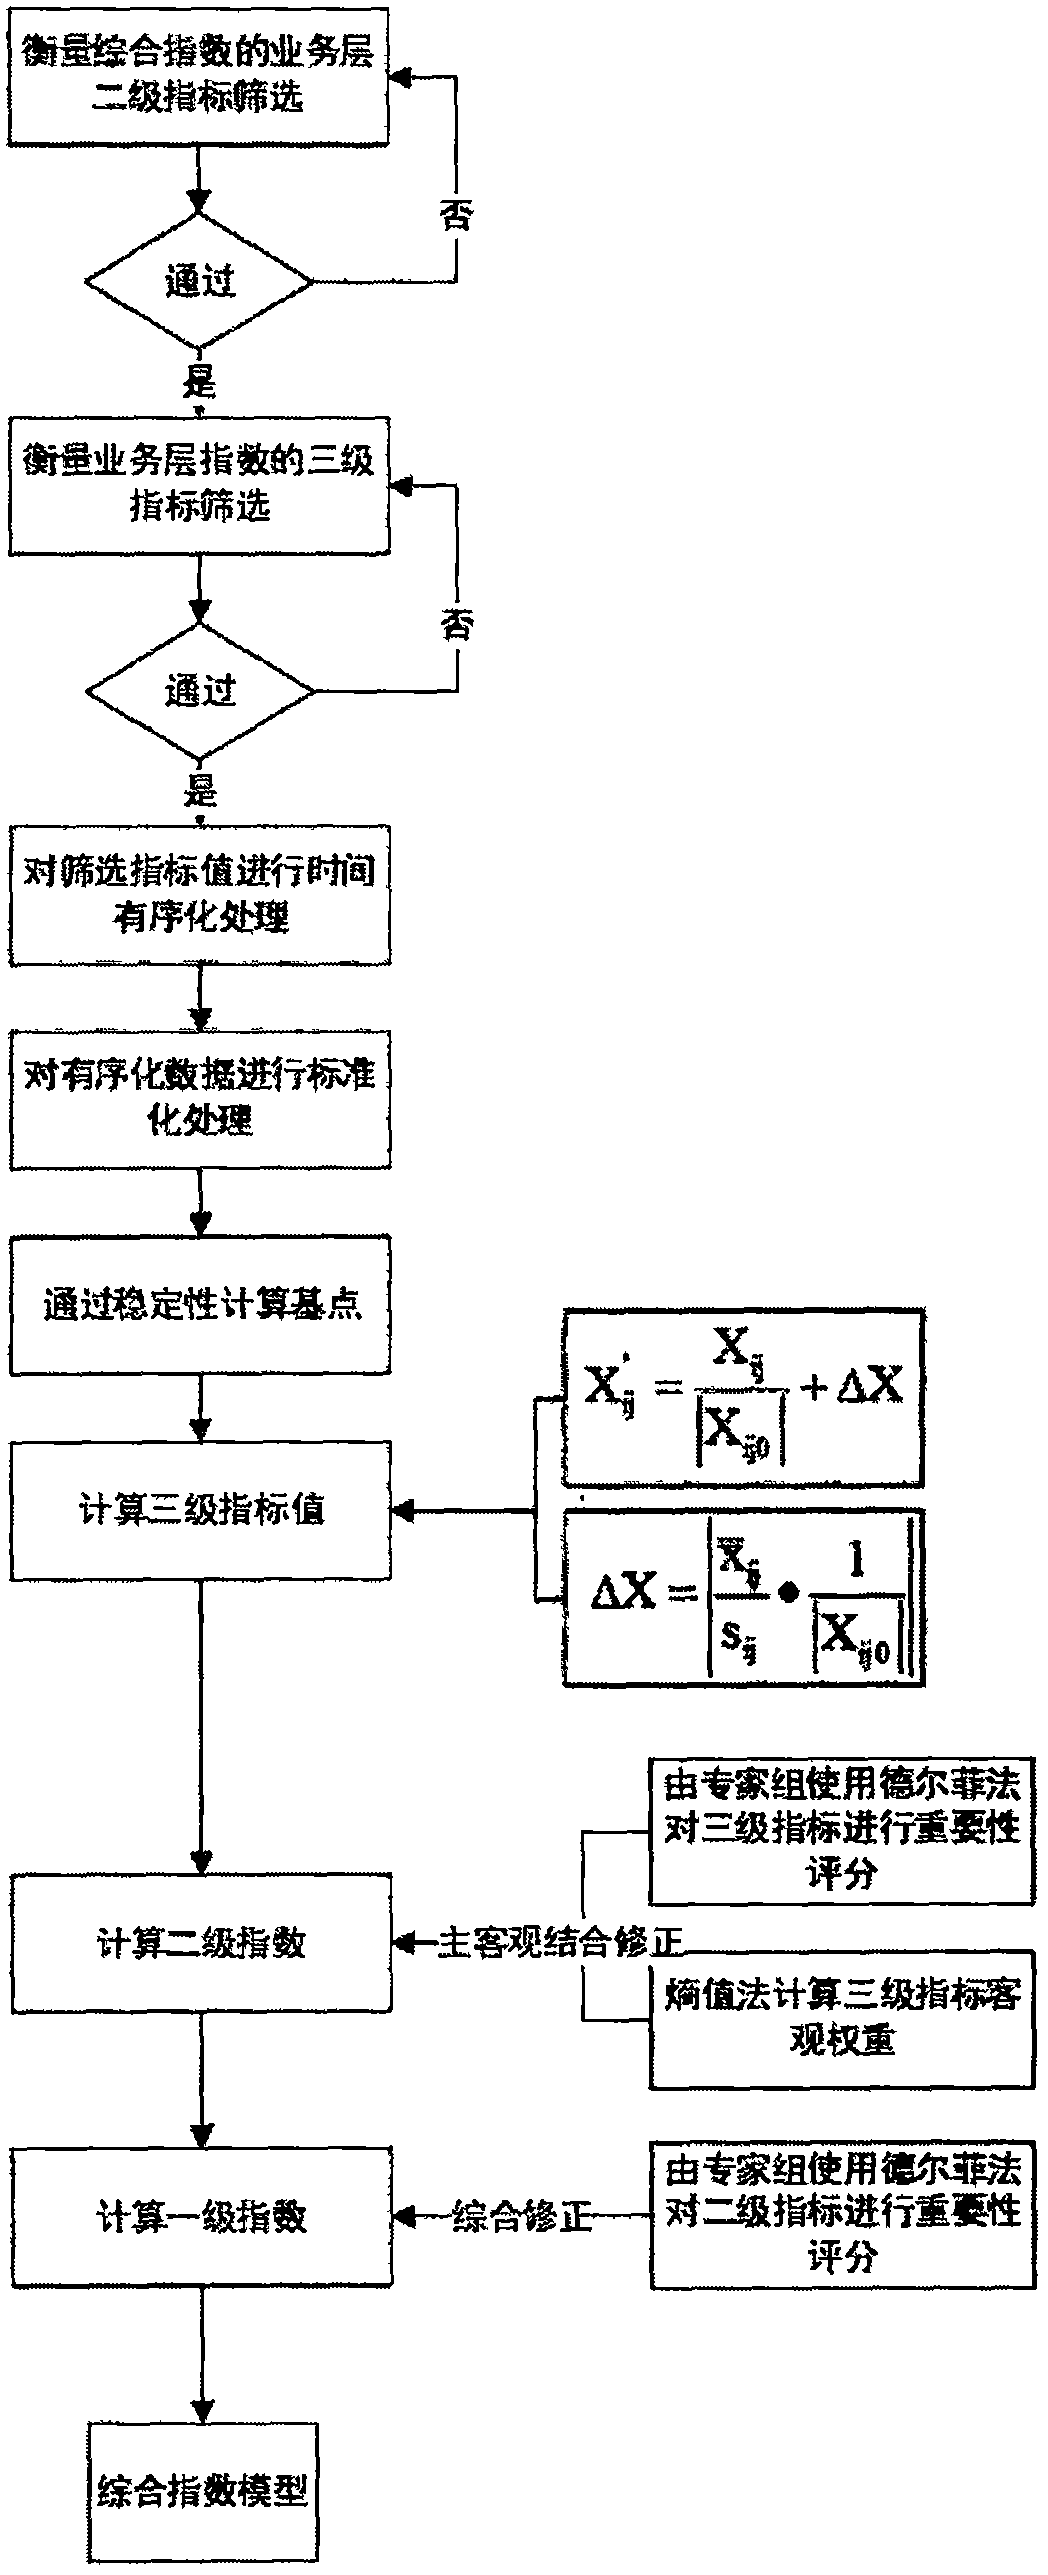 Method for constructing index system model